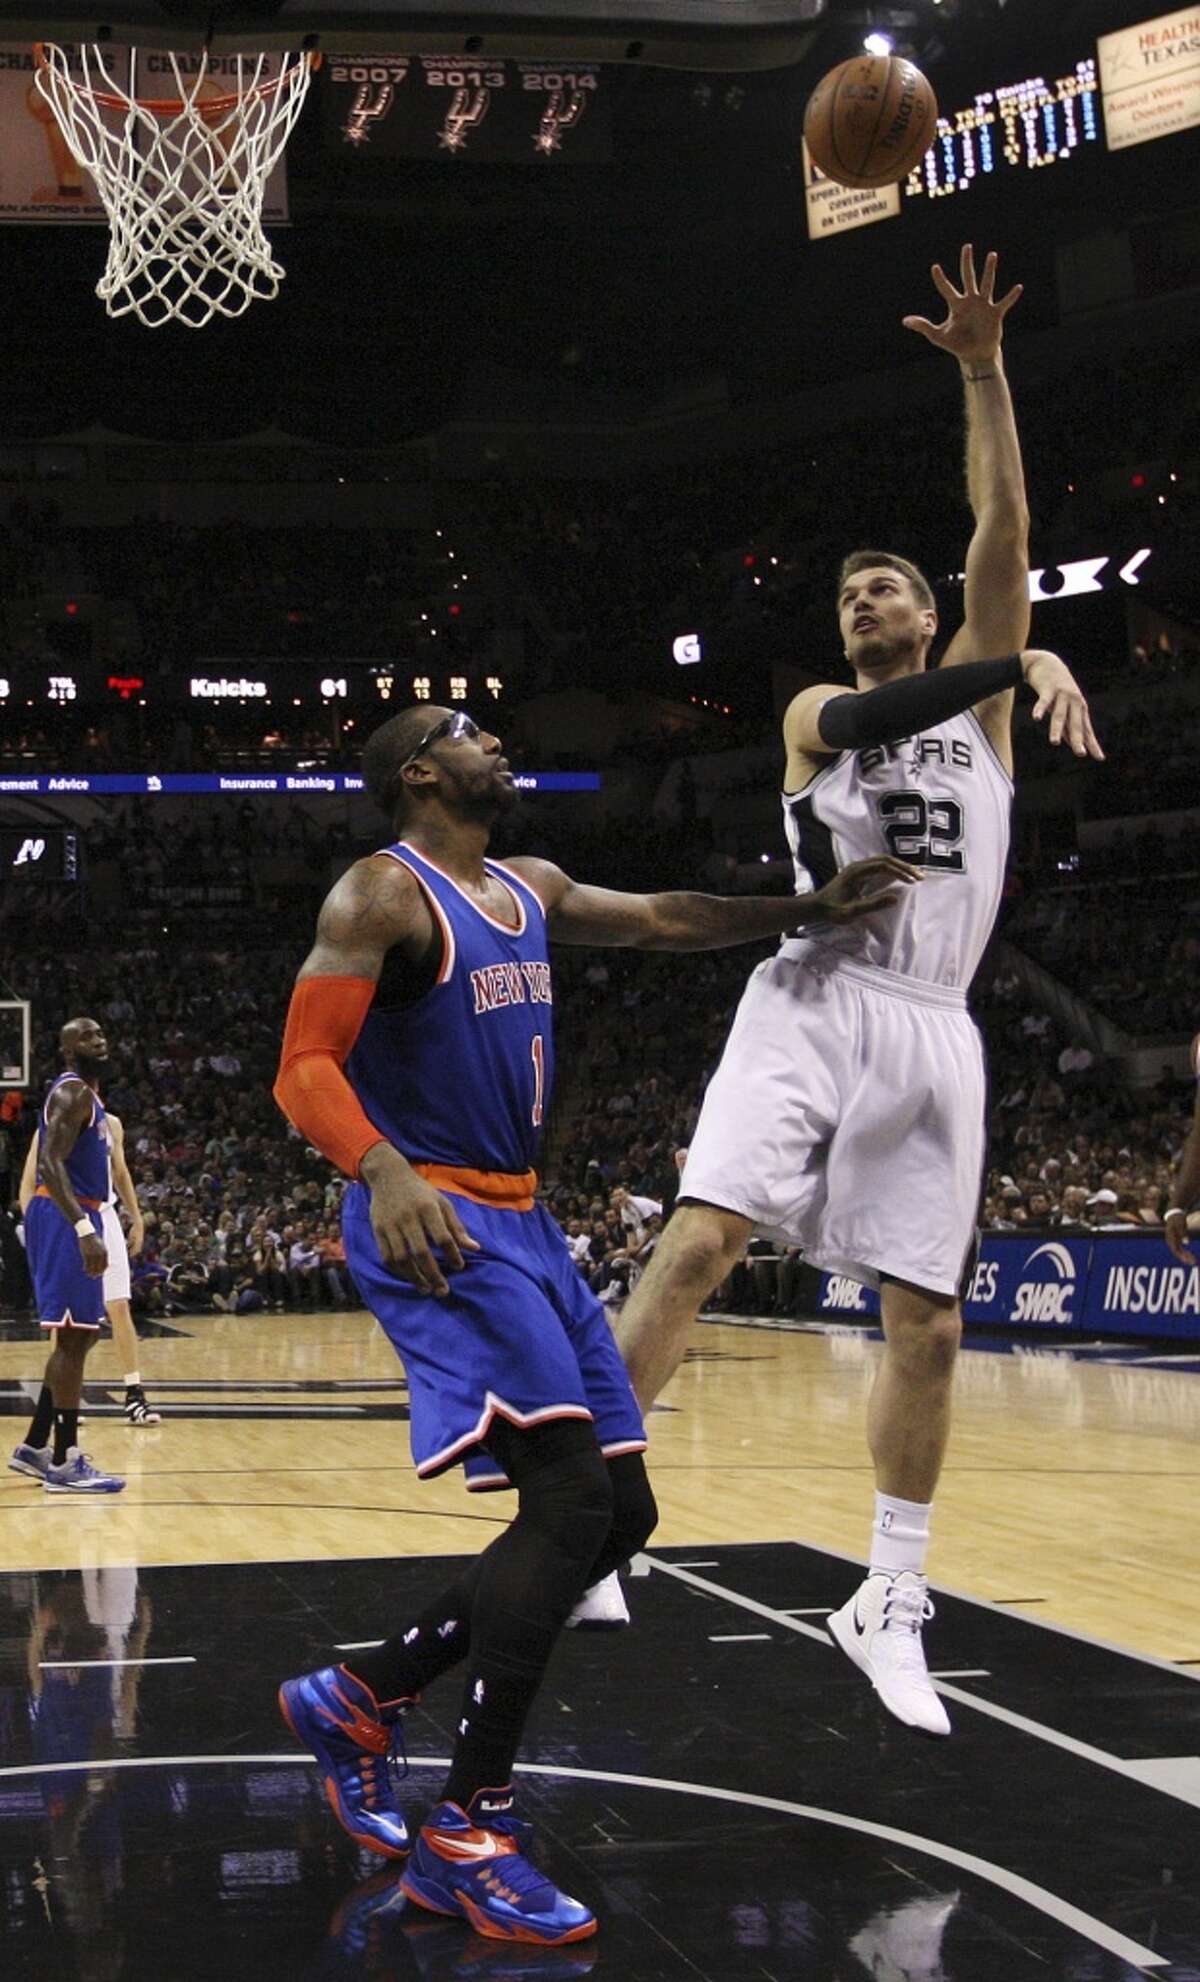 San Antonio Spurs' Tiago Splitter shoots over New York Knicks' Amar'e Stoudemire during the second half at the AT&T Center, Wednesday, Dec. 10, 2014. The Spurs won 109-95.